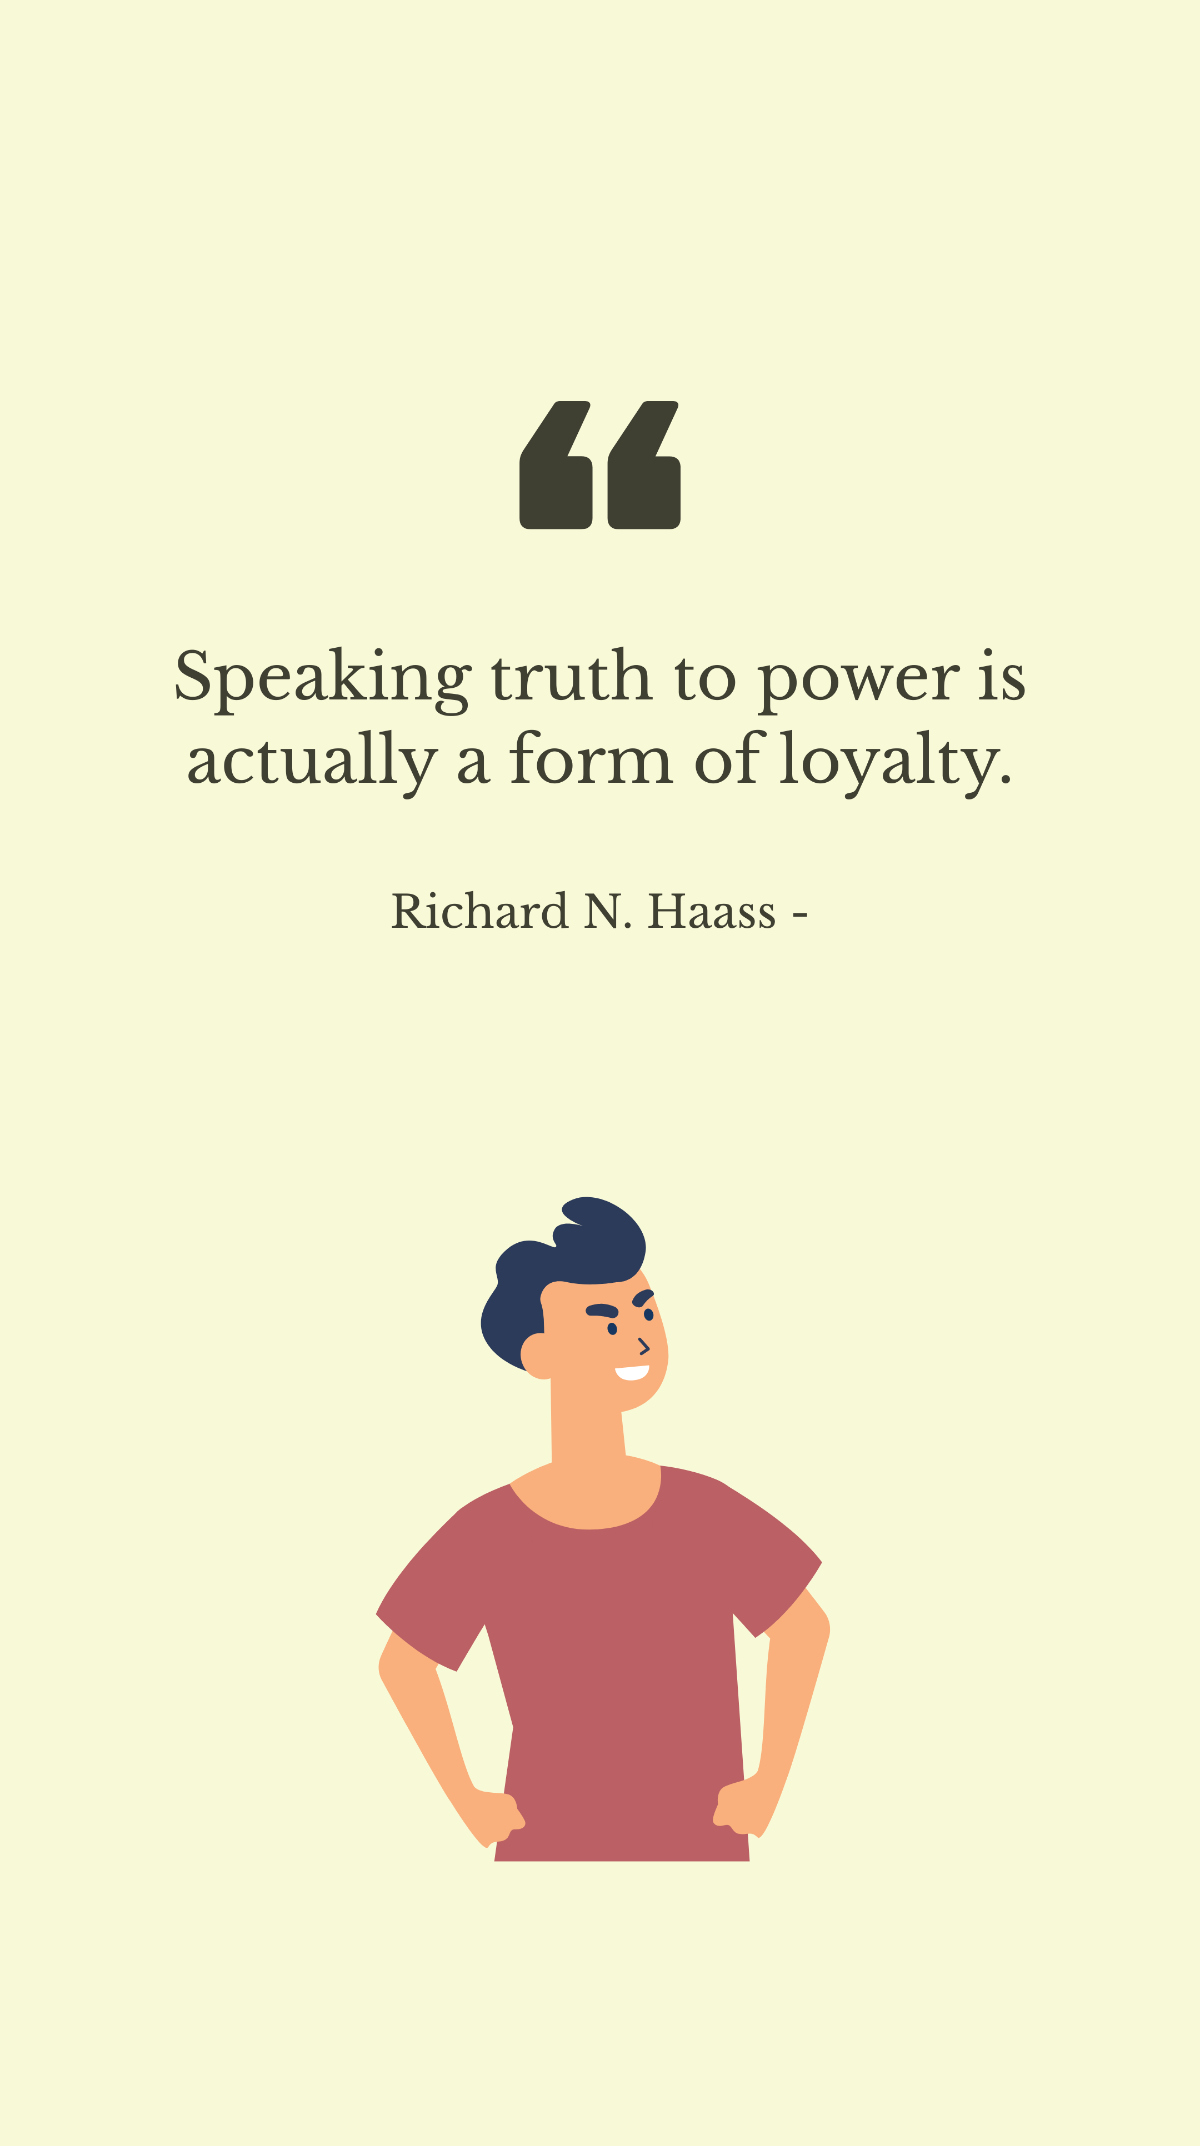 Free Richard N. Haass - Speaking truth to power is actually a form of loyalty. Template